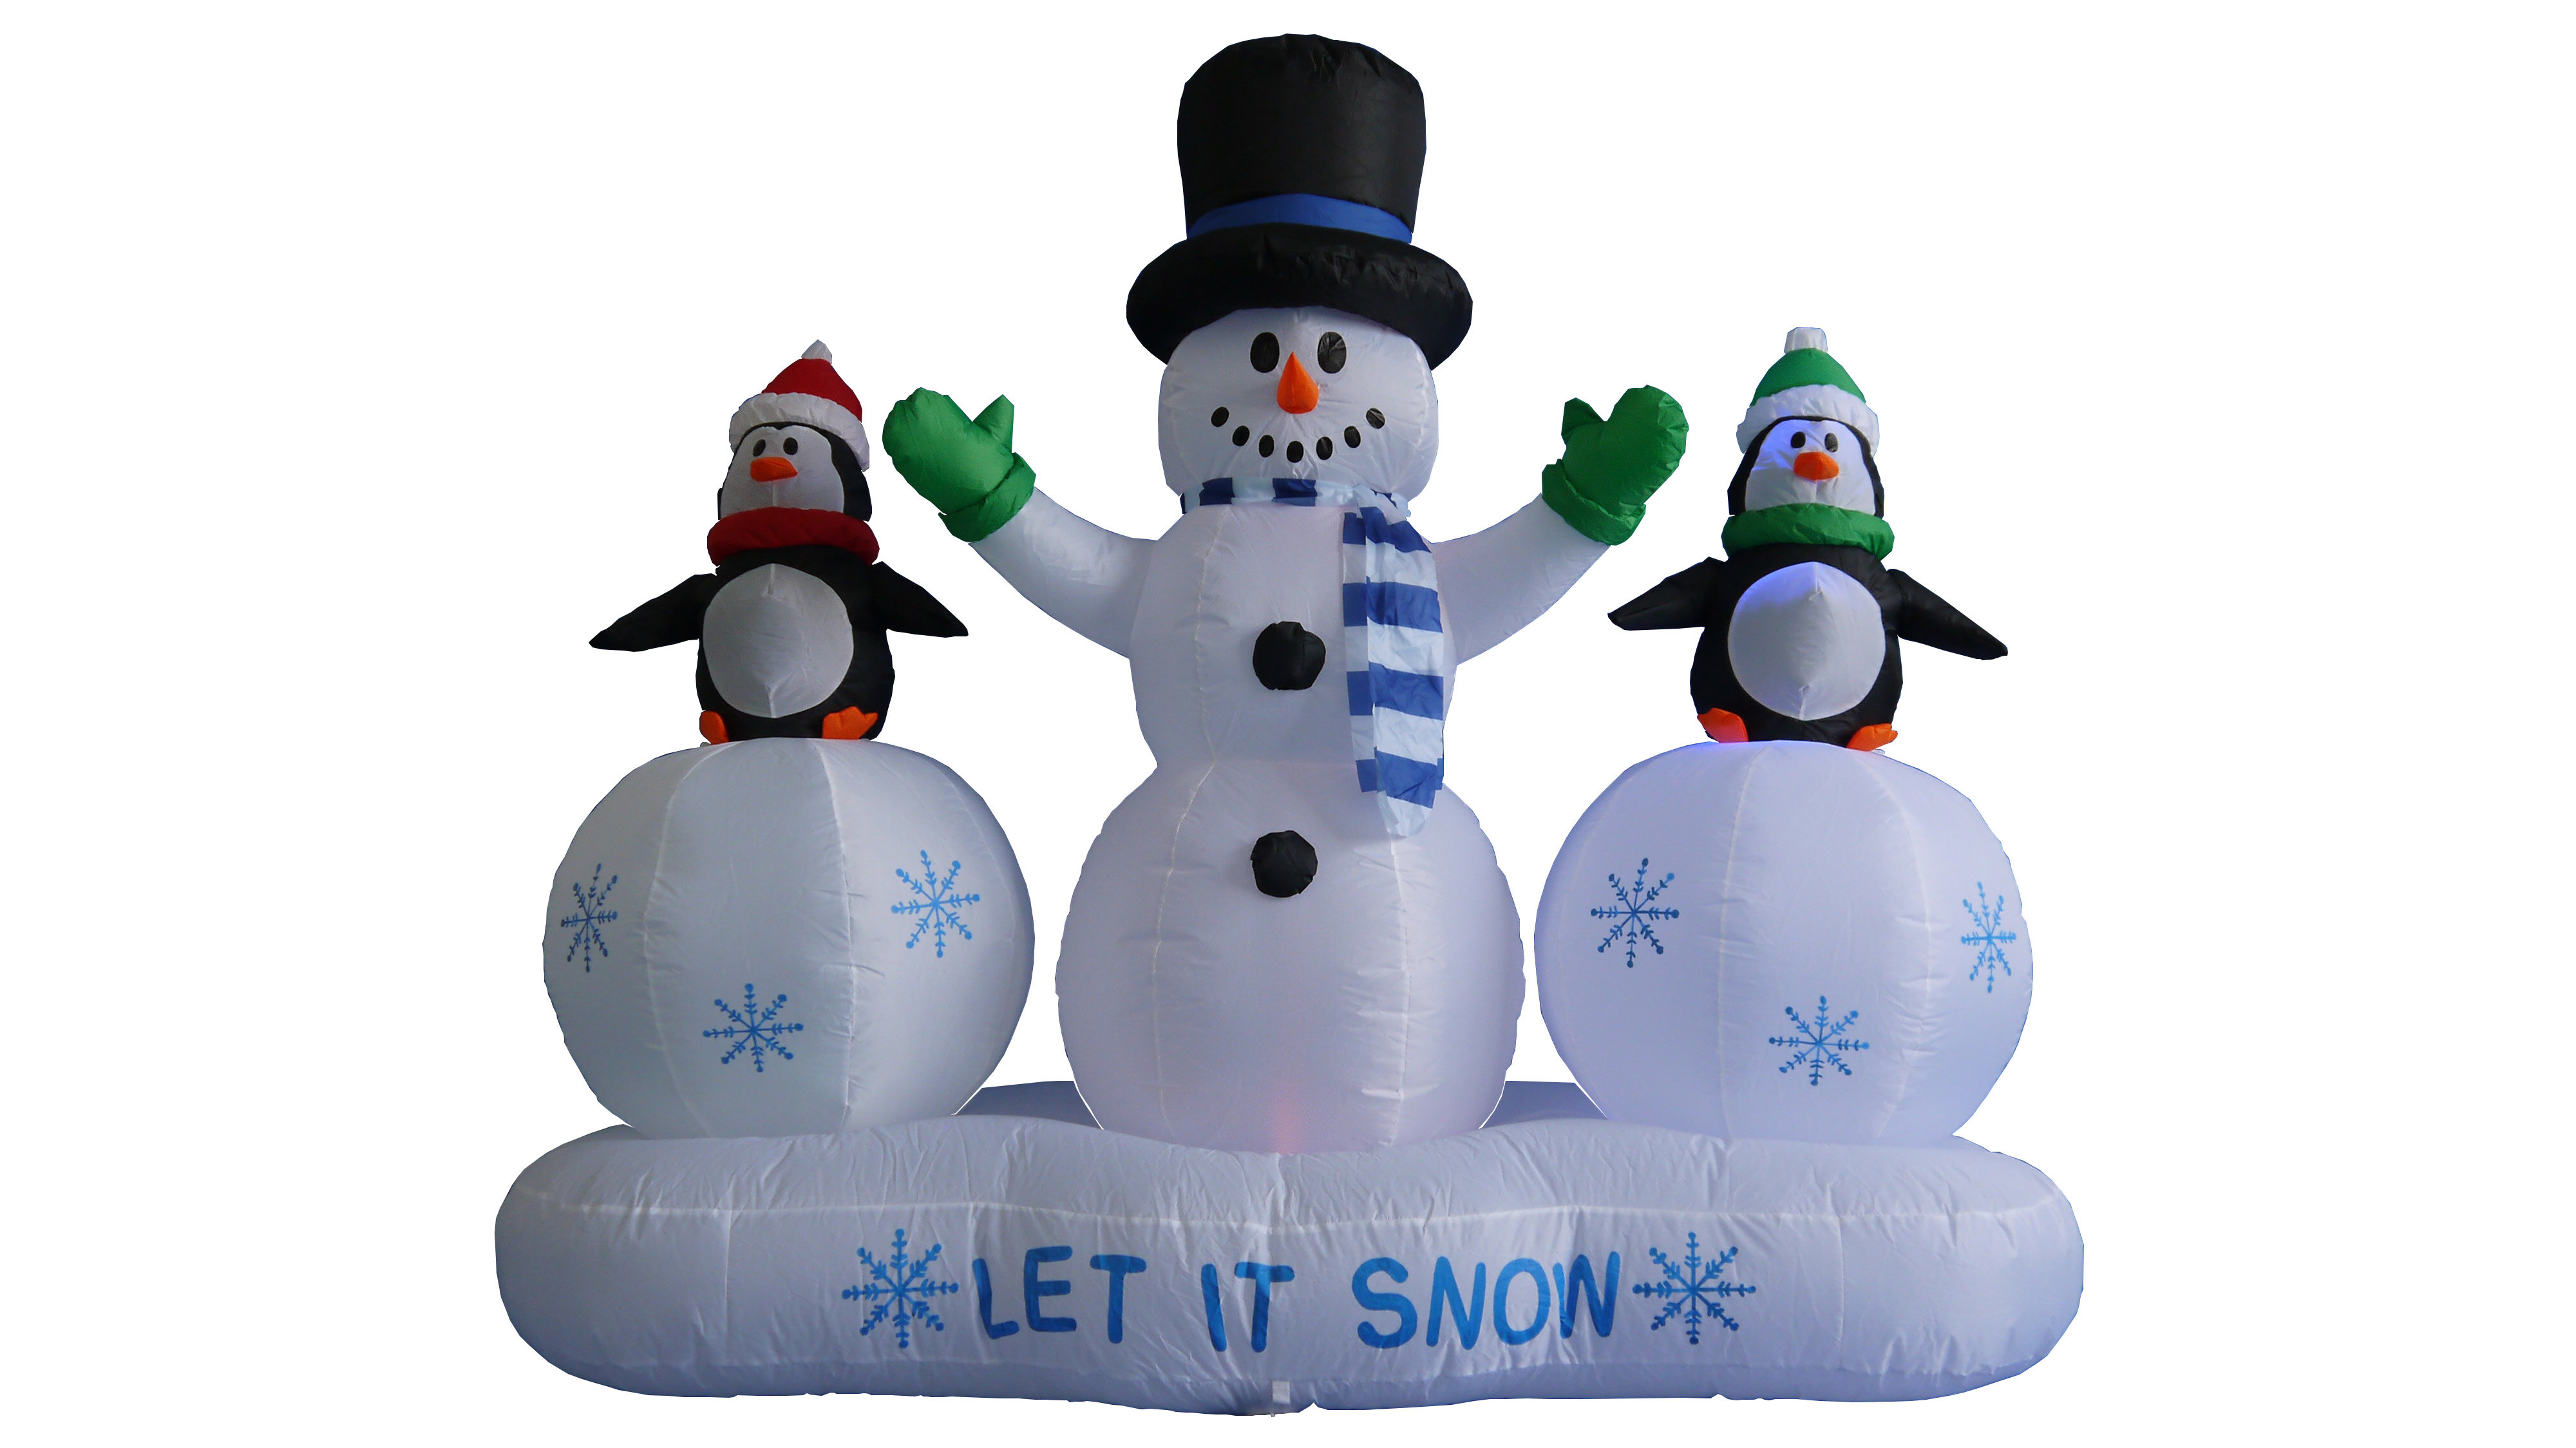 The Holiday Aisle® 6 ft. Snowman with Penguins Lightshow Decoration ...